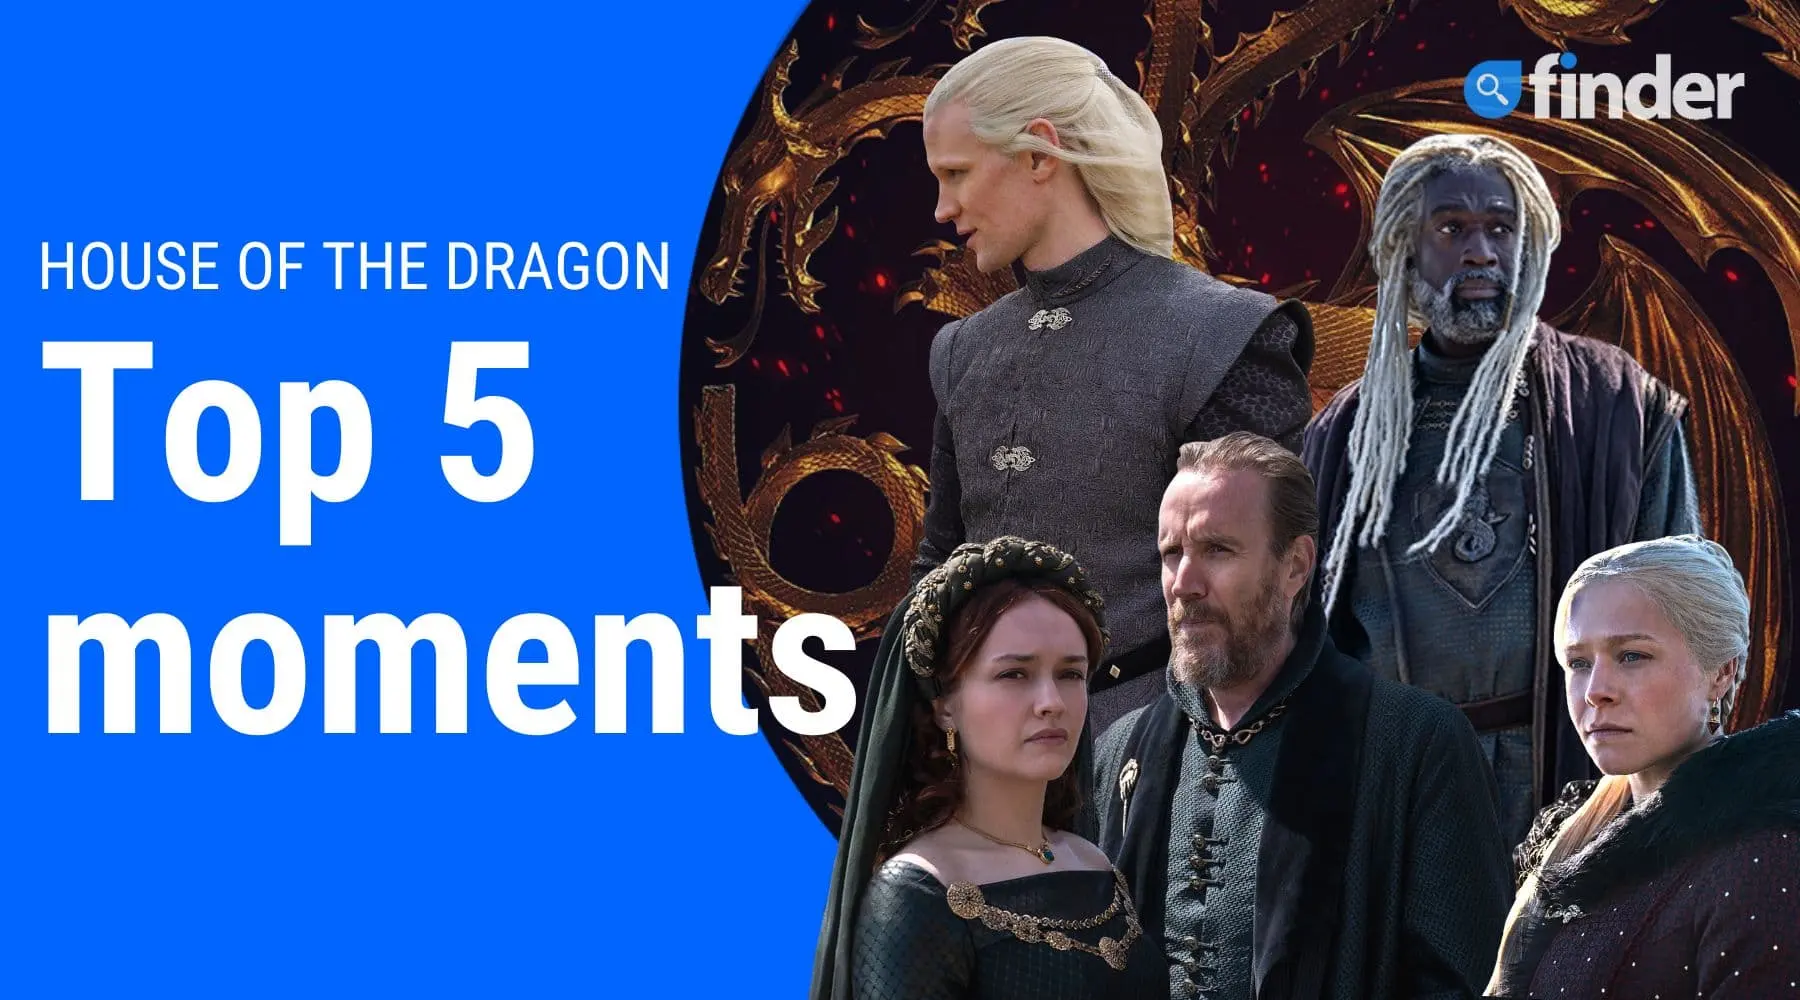 House of the Dragon episode 1: 5 amazing can't-miss moments